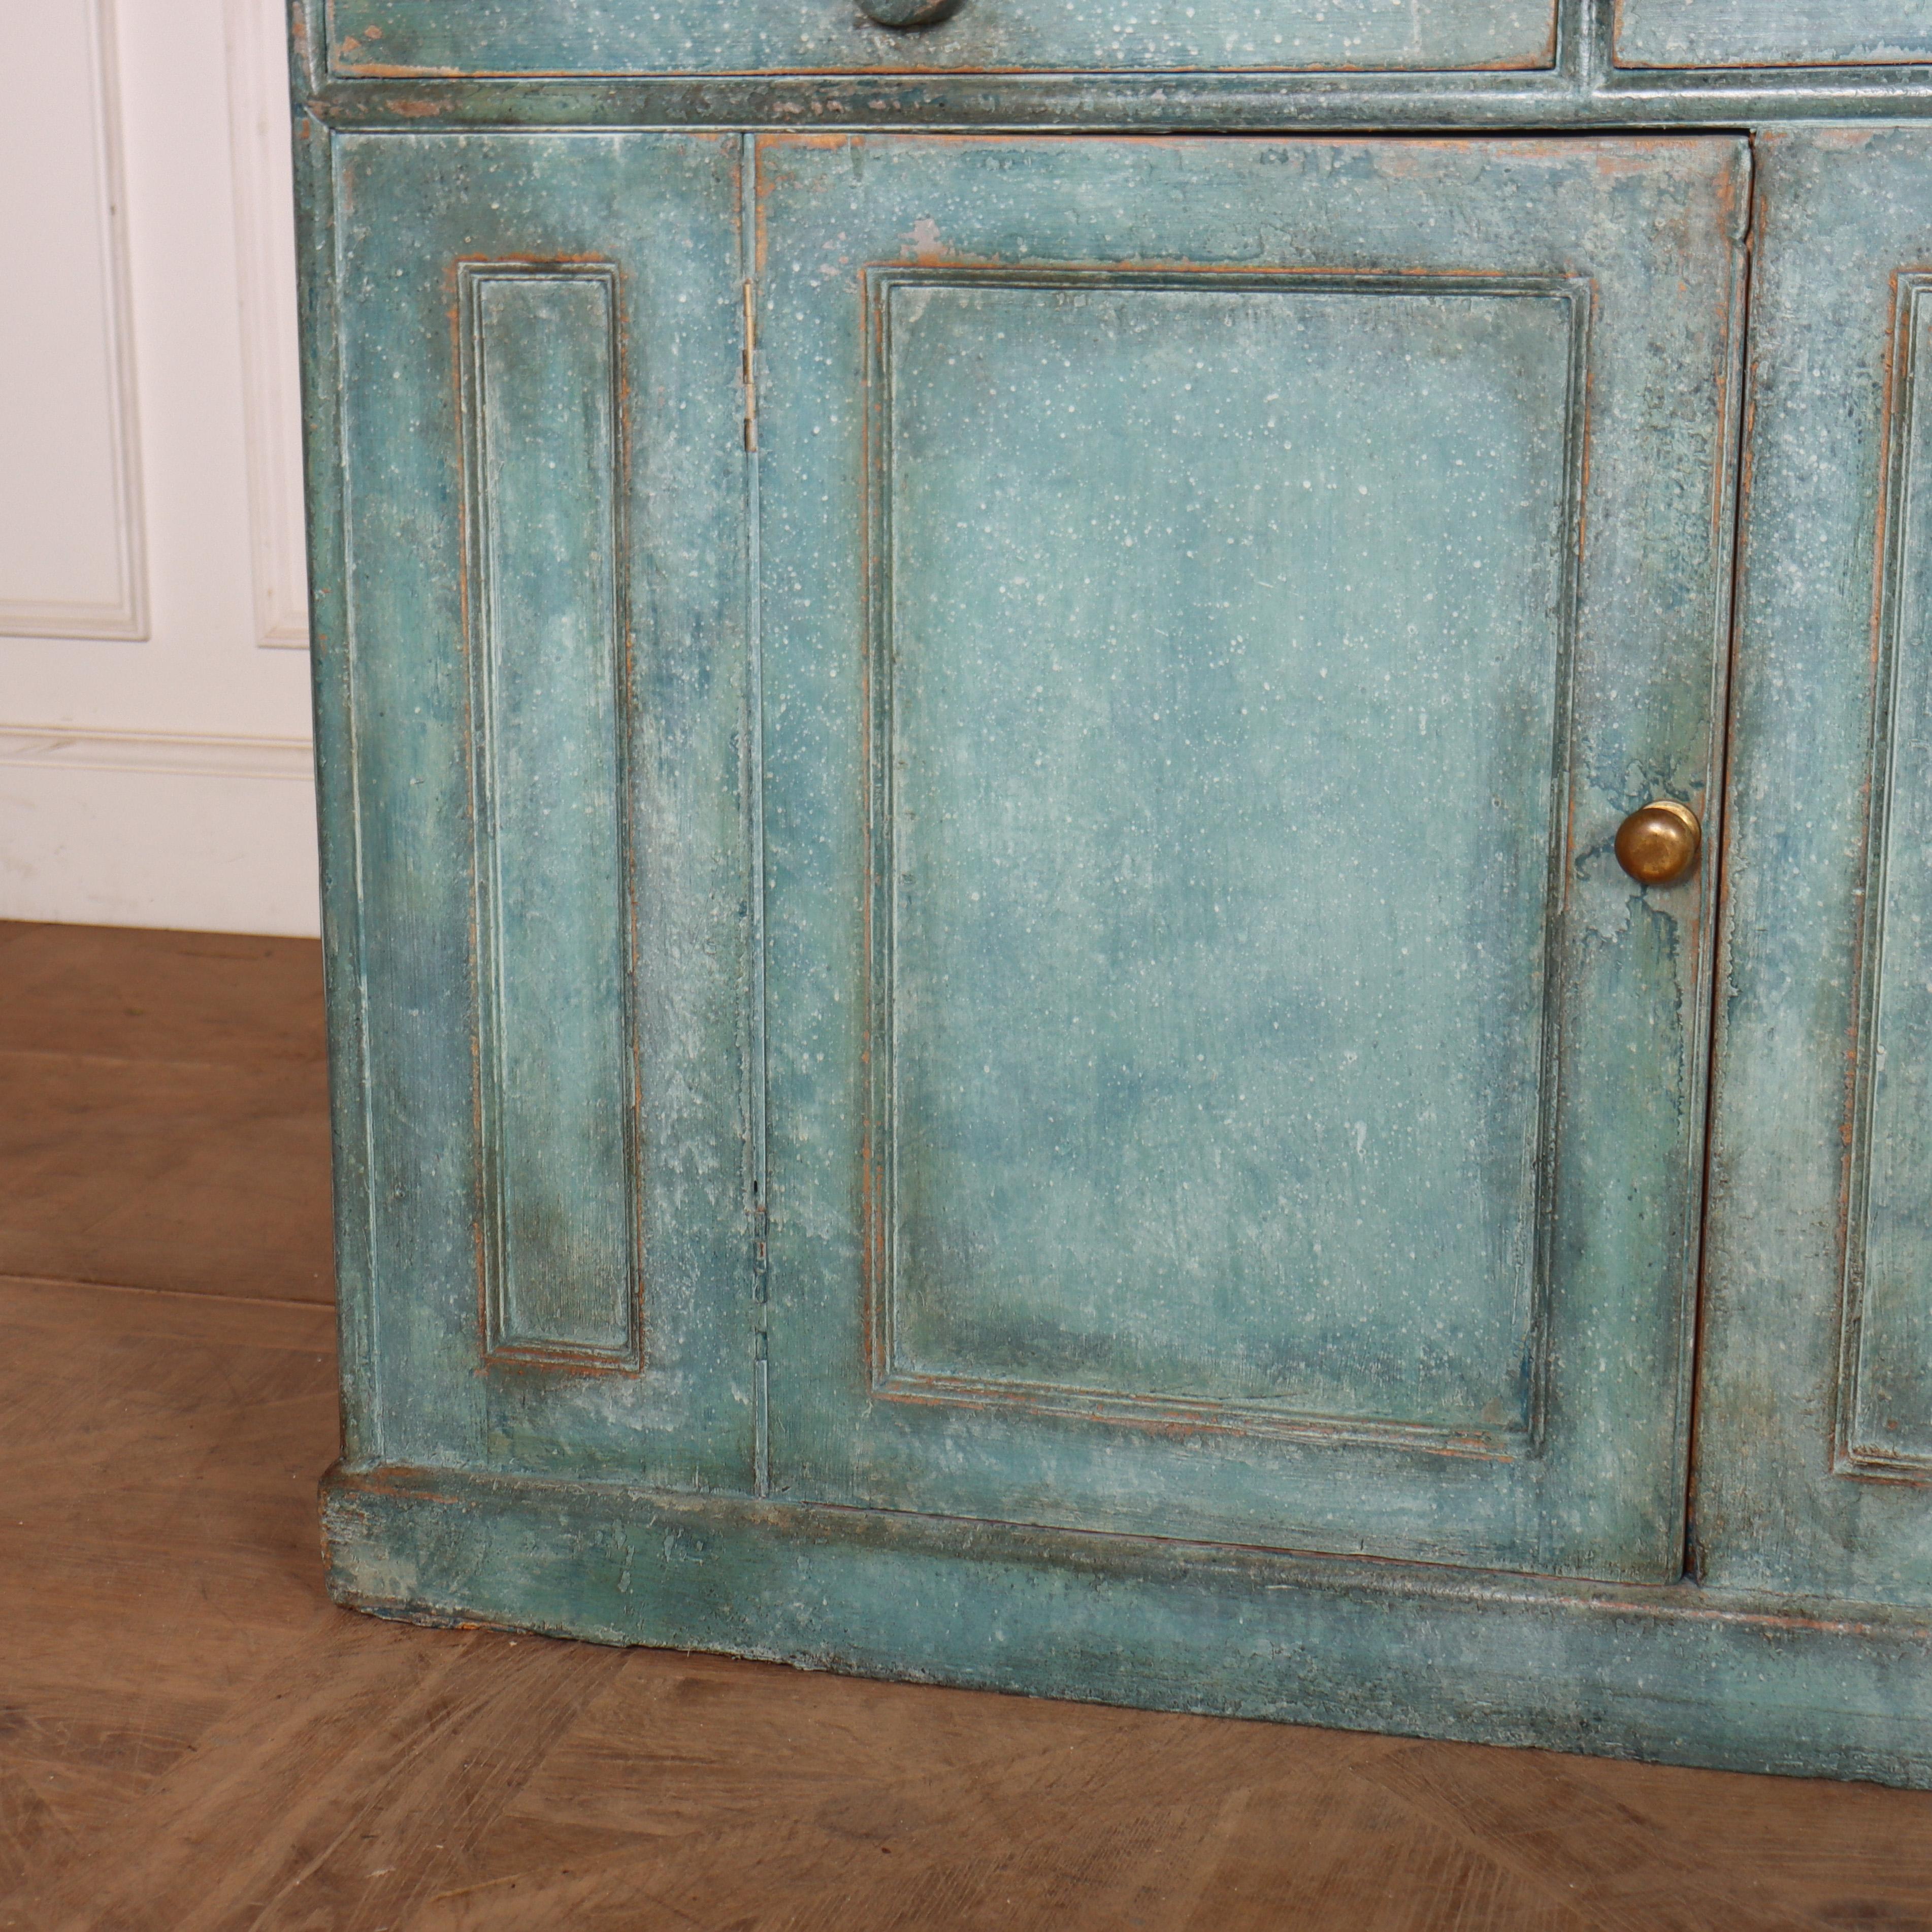 Scottish Painted Dairy Dresser Base In Good Condition For Sale In Leamington Spa, Warwickshire